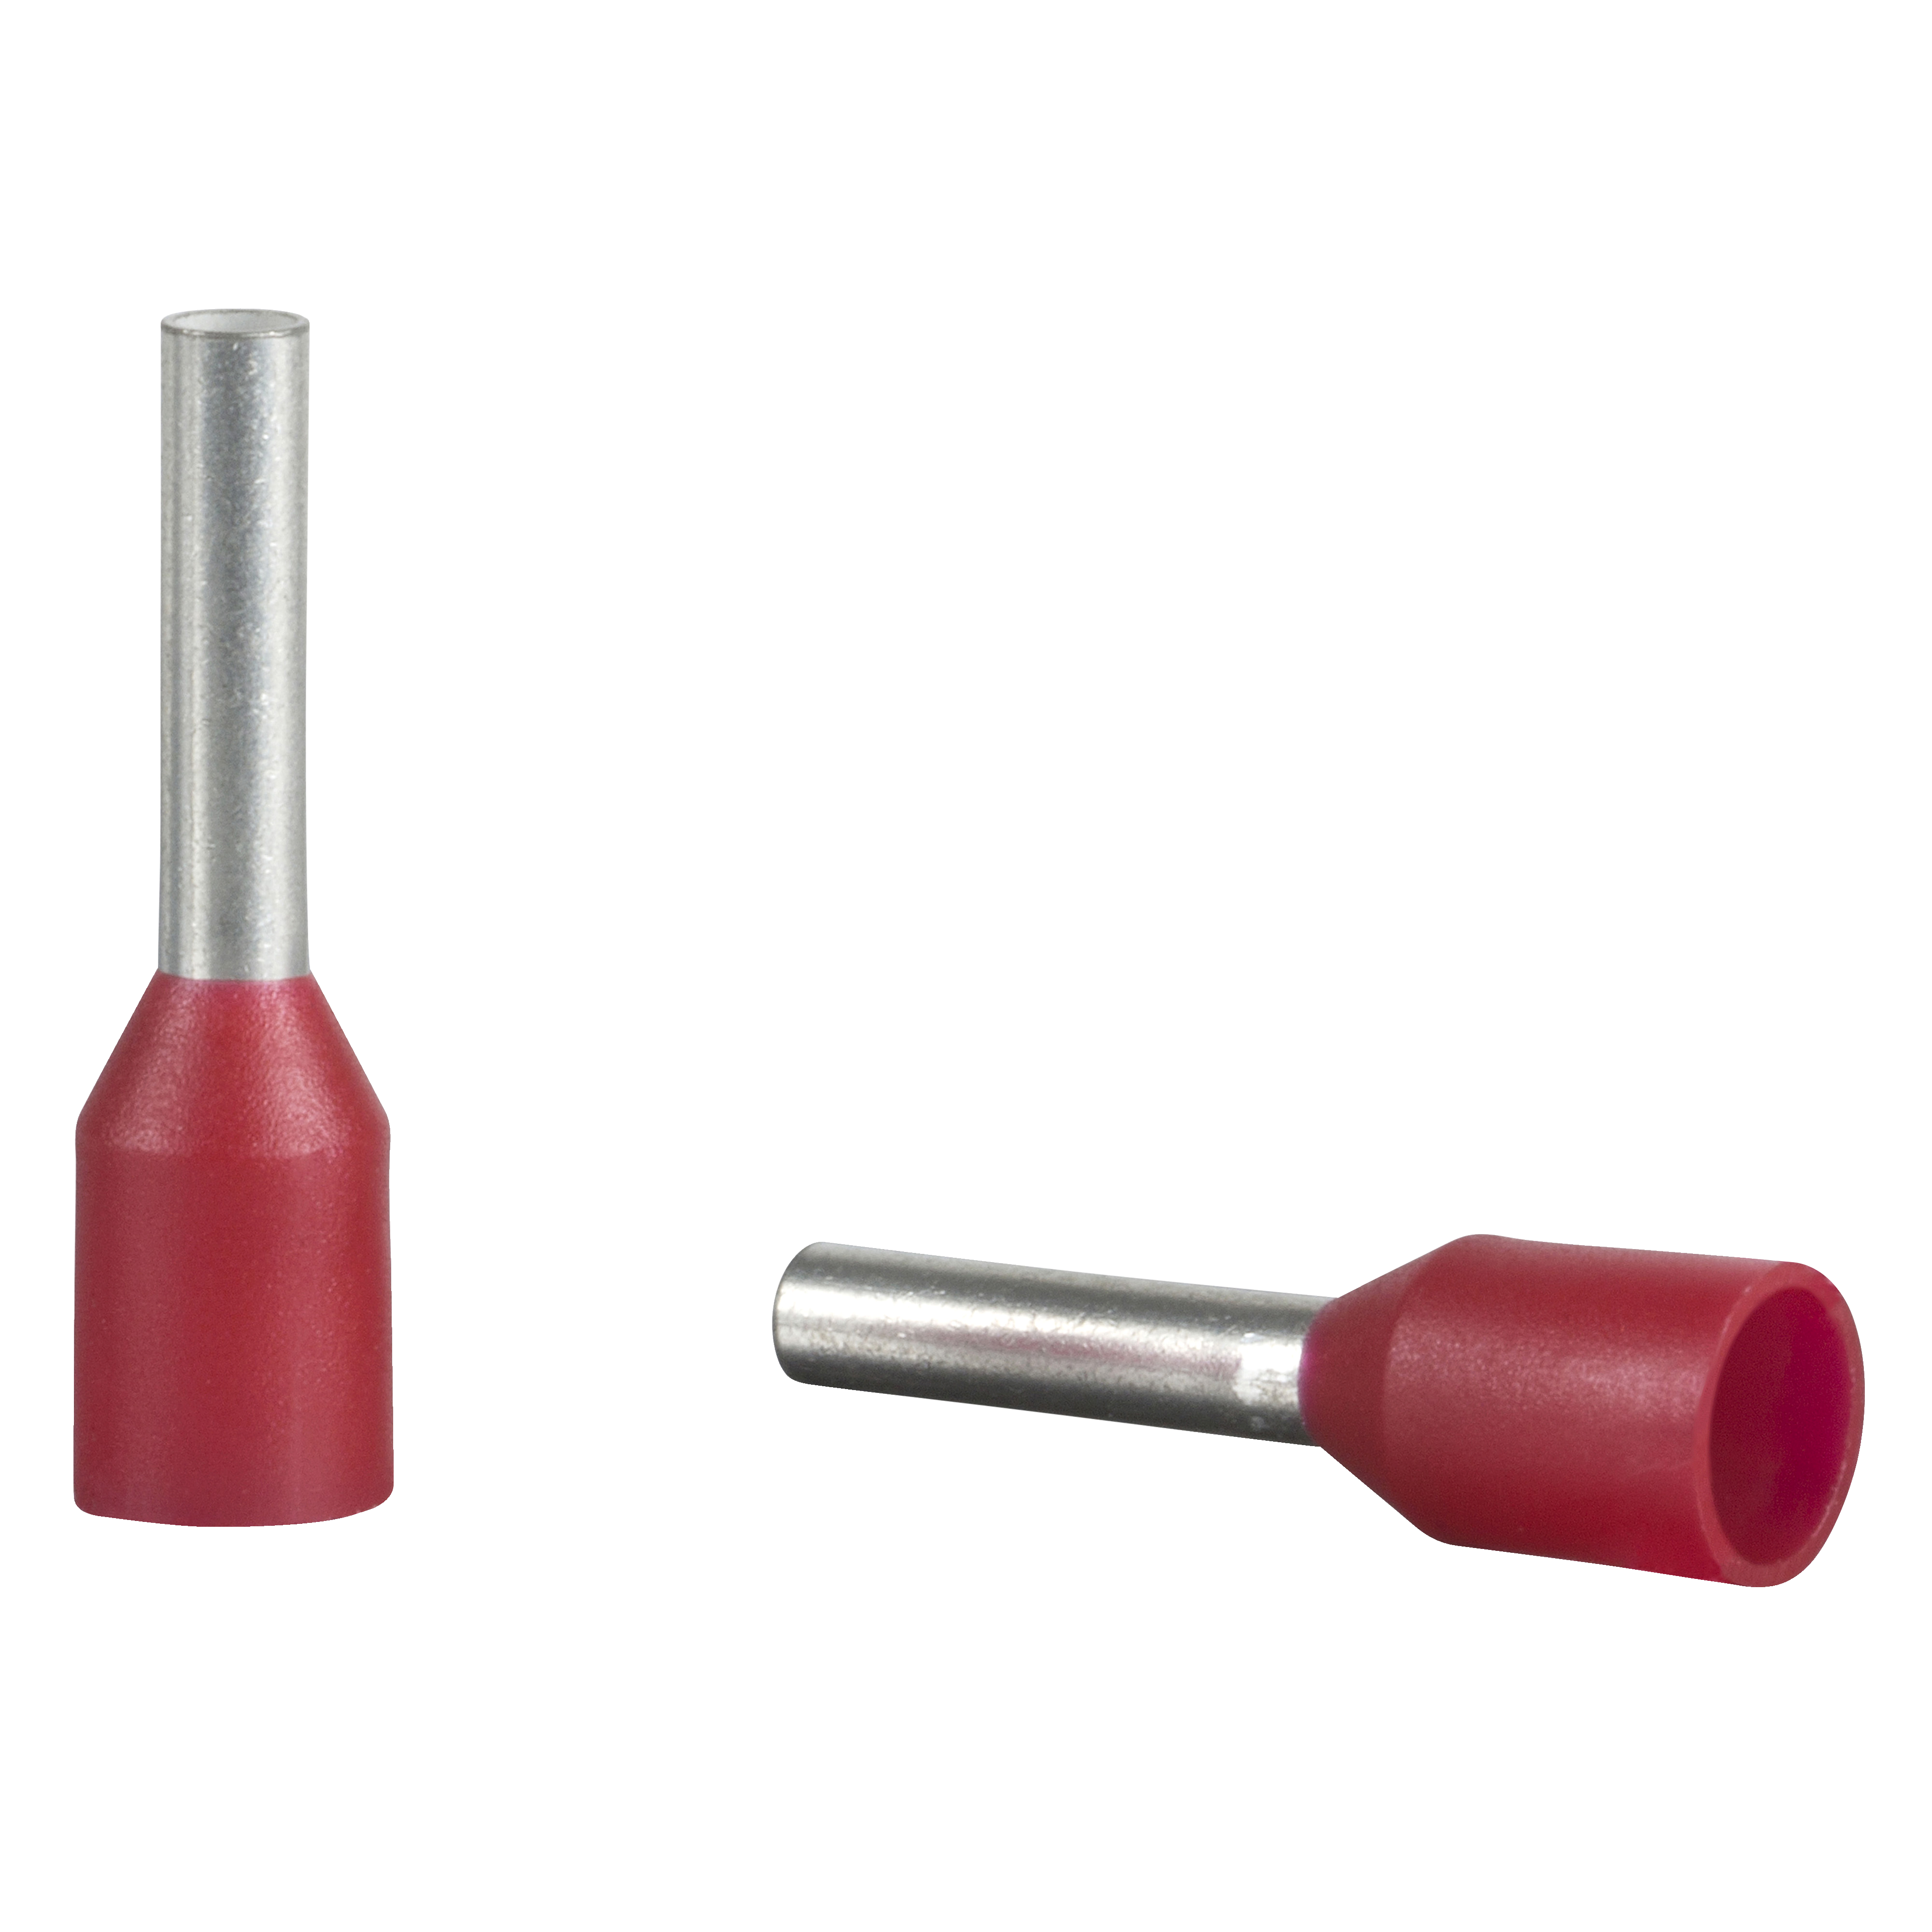 Cable ends, Linergy TR cable ends, single conductor, red, 1mmÂ², medium size, 10 sets of 100